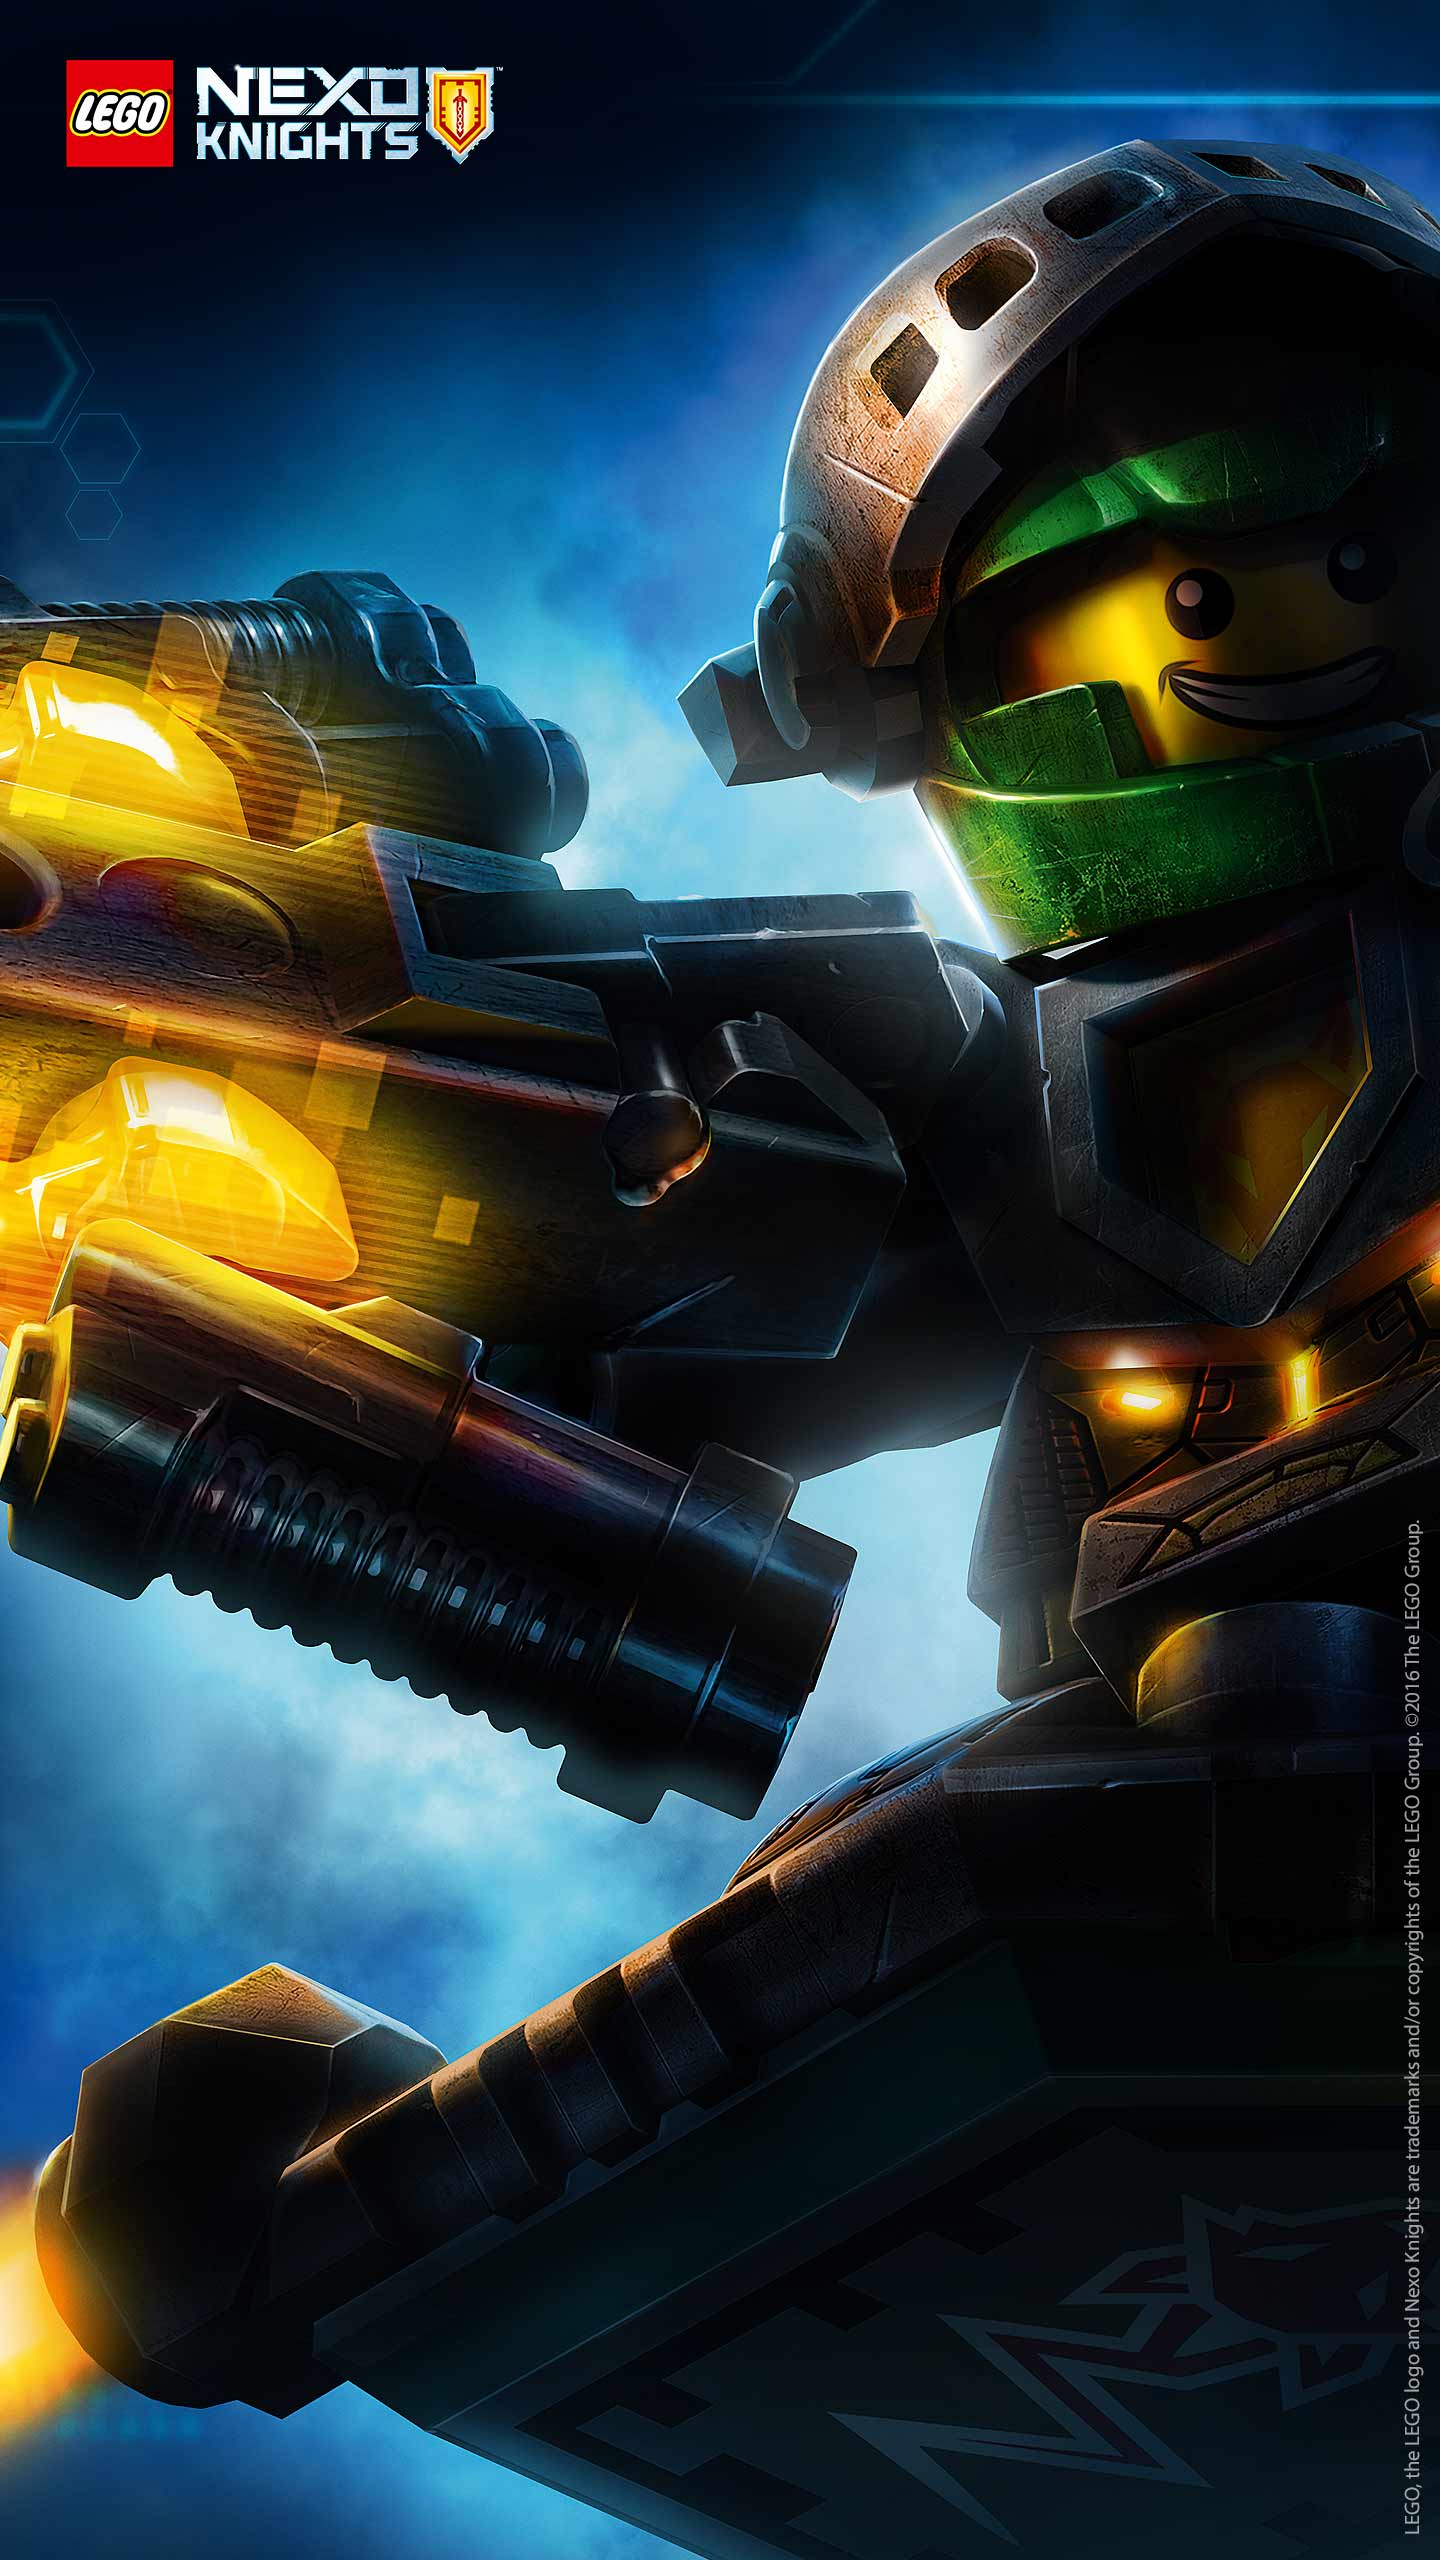 Axl In The Shadows - Nexo Knights , HD Wallpaper & Backgrounds